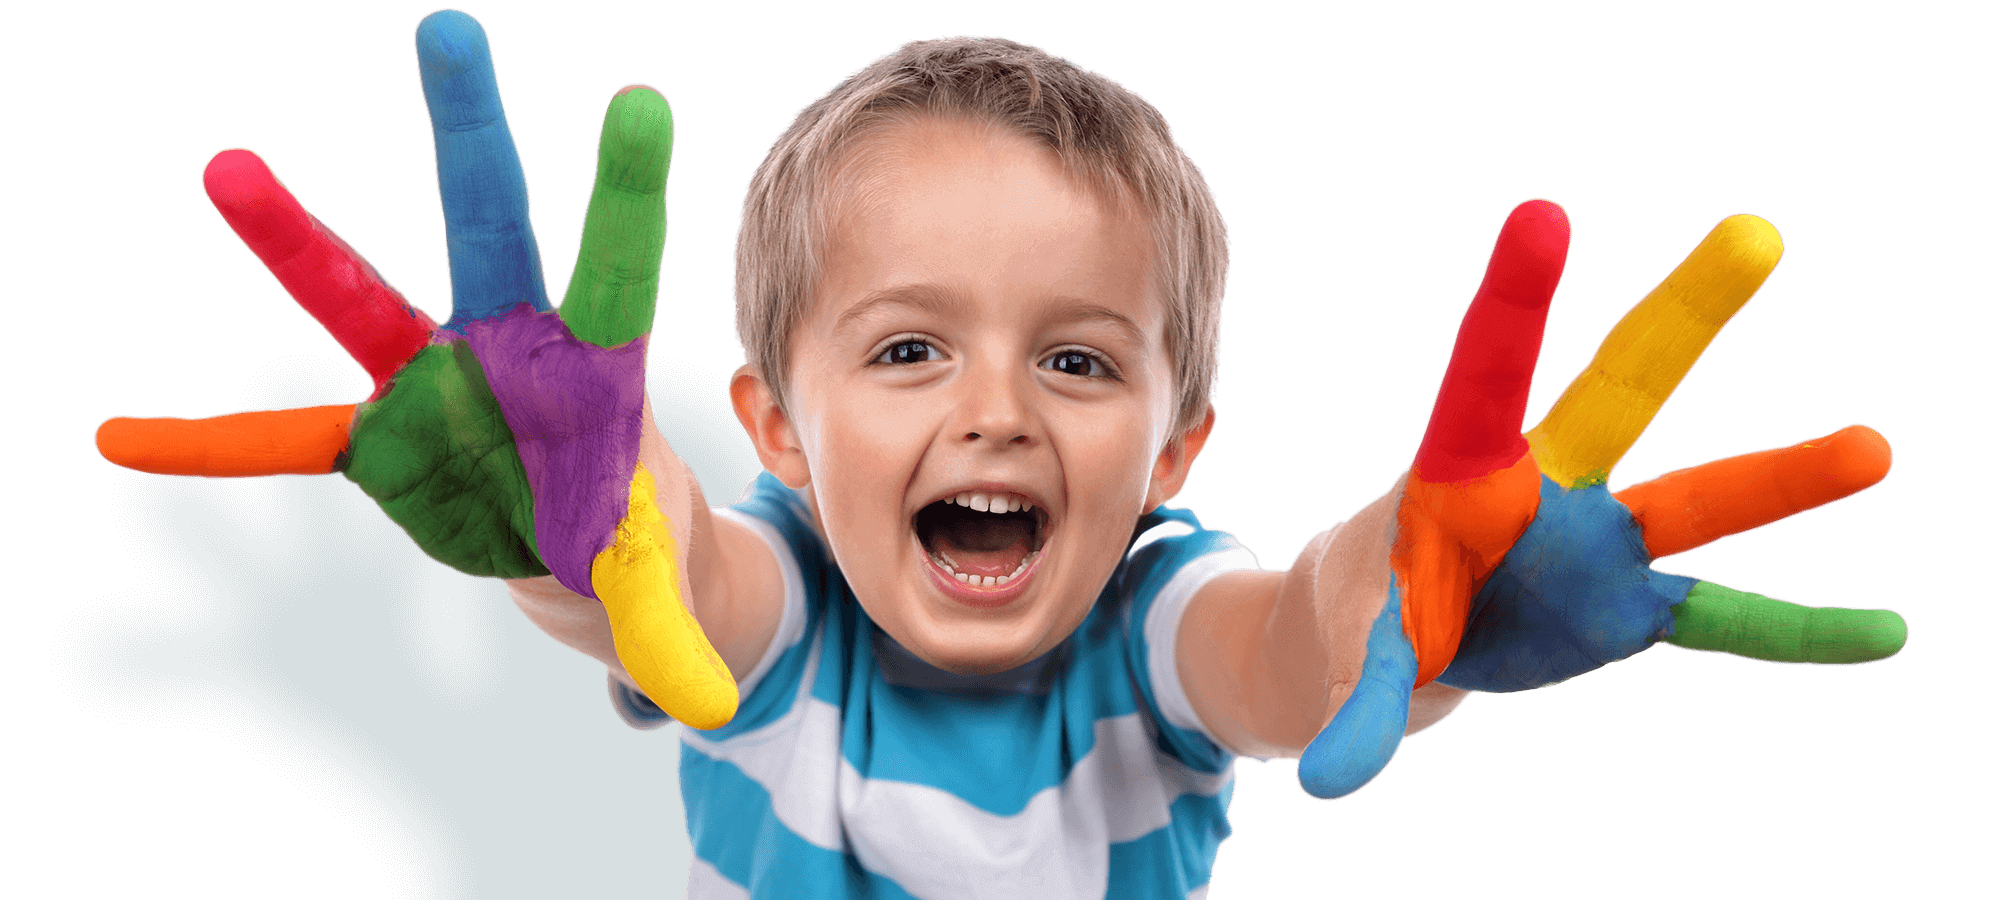 kids klubs about us page banner photo, boy with hands painted